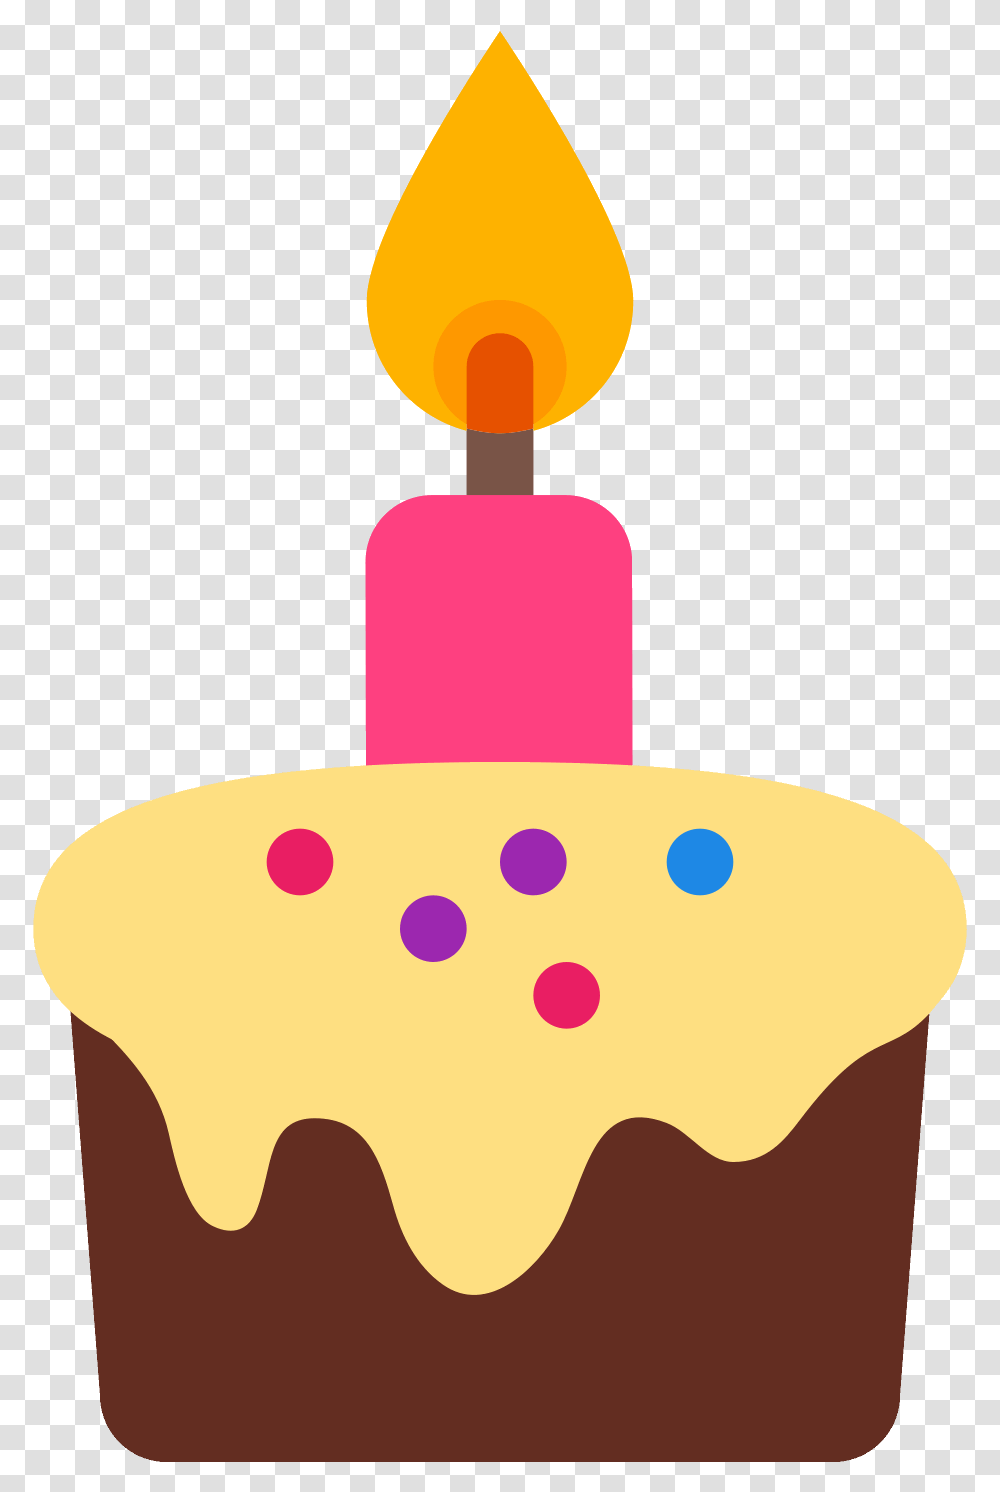 Download Cute Cake Icon Cute Icon Birthday Full Size Cute Cake, Dessert, Food, Candle, Sweets Transparent Png